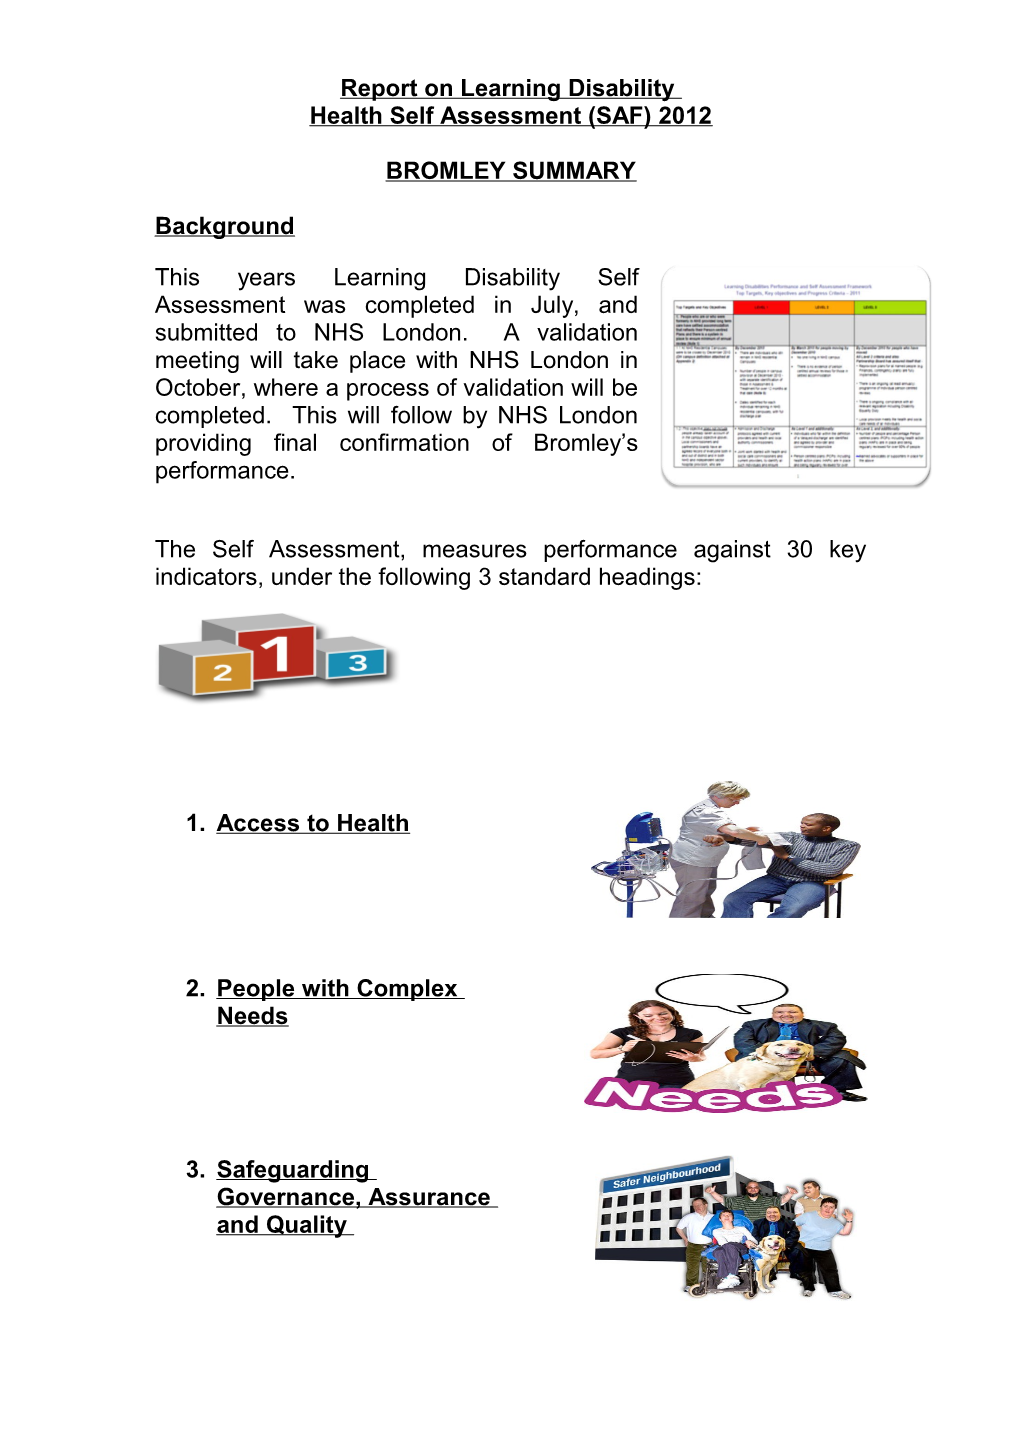 Report on Learning Disability Health Self Assessment 2011